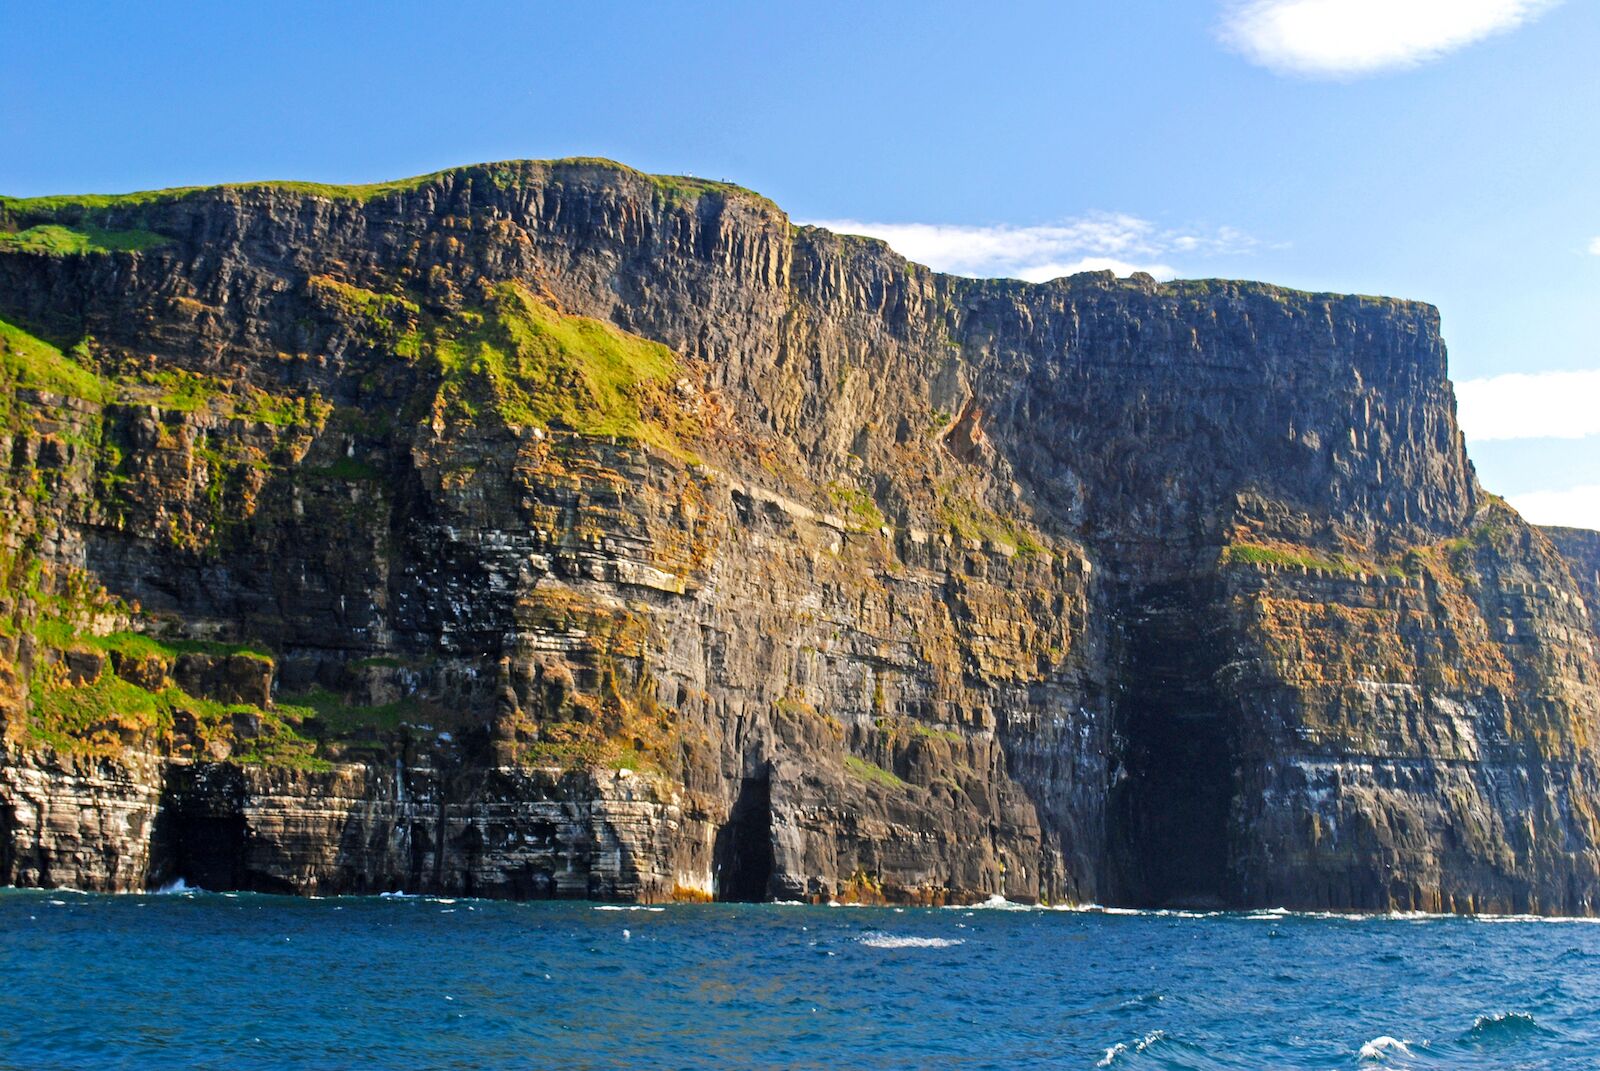 The Cliffs of Moher from a boat tour. The Harry Potter cave featured in "Harry Potter and the Half-Blood Prince" is visible.